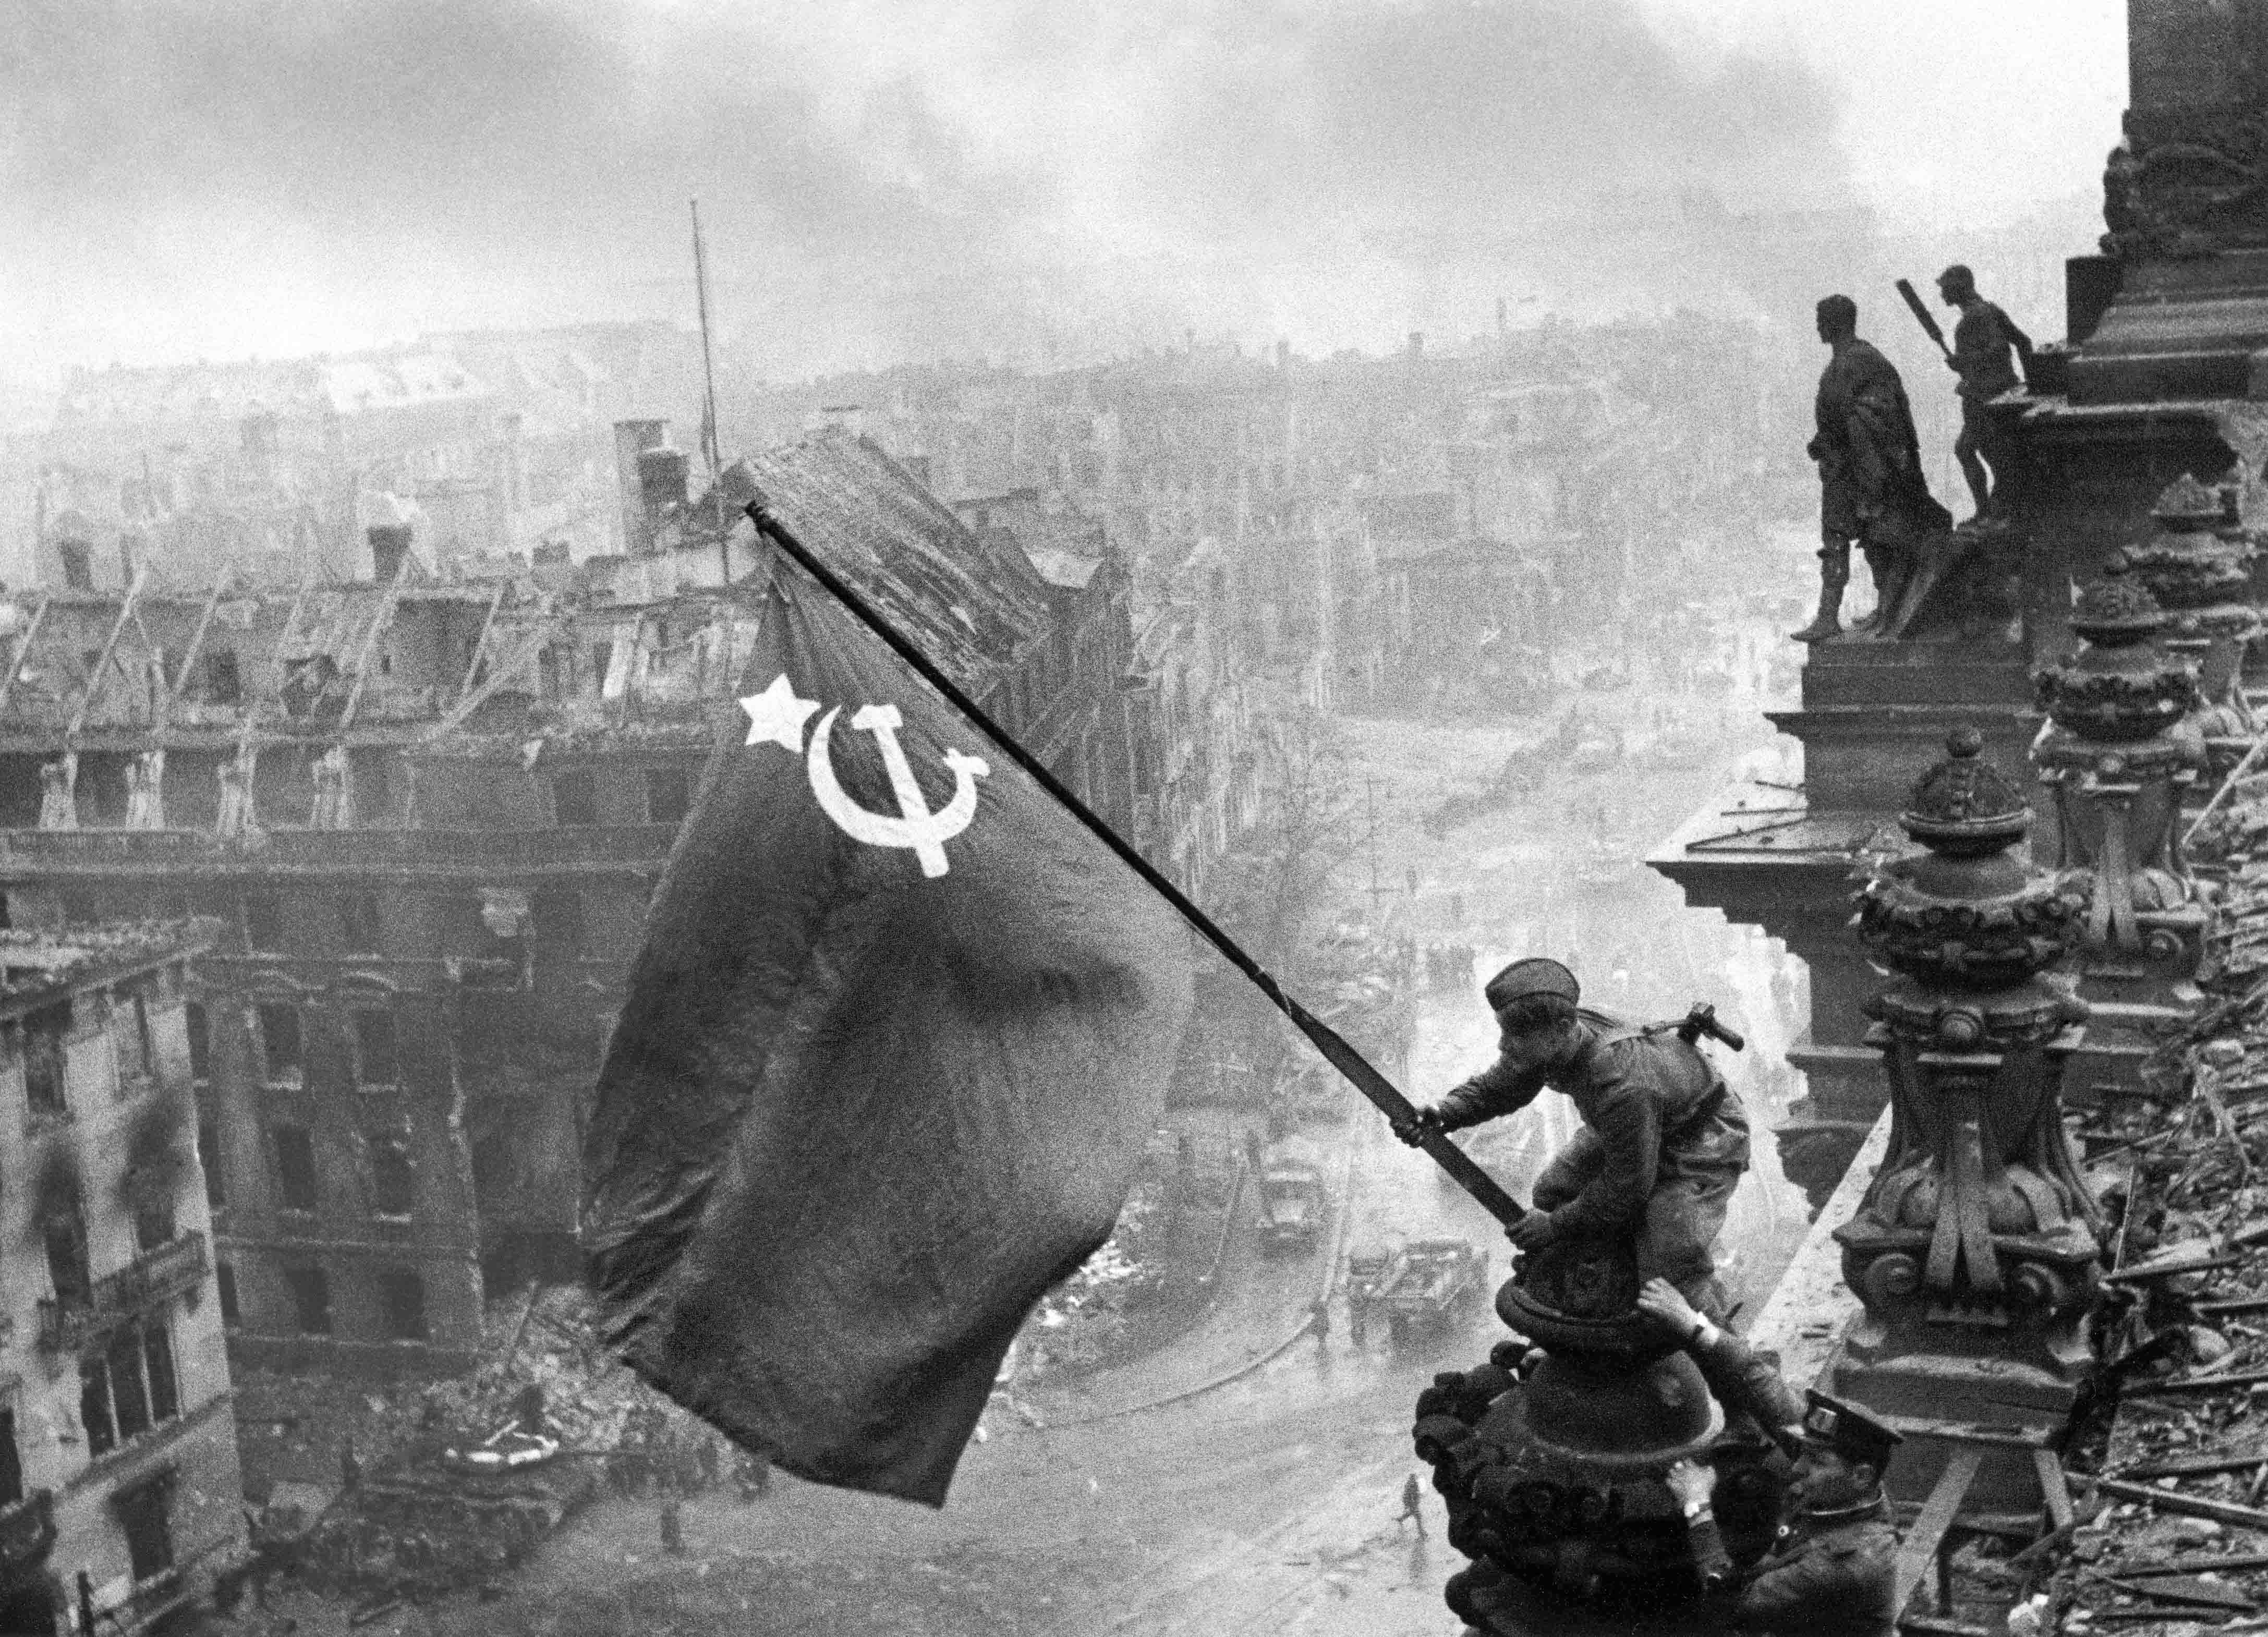 Soviet flag raised on the Reichstag during the Battle of Berlin. Photo by Yevgeny Khaldei (2 May 1945). Ministry of Defense of the Russian Federation (Mil.ru). PD-Author release. Wikimedia Commons.